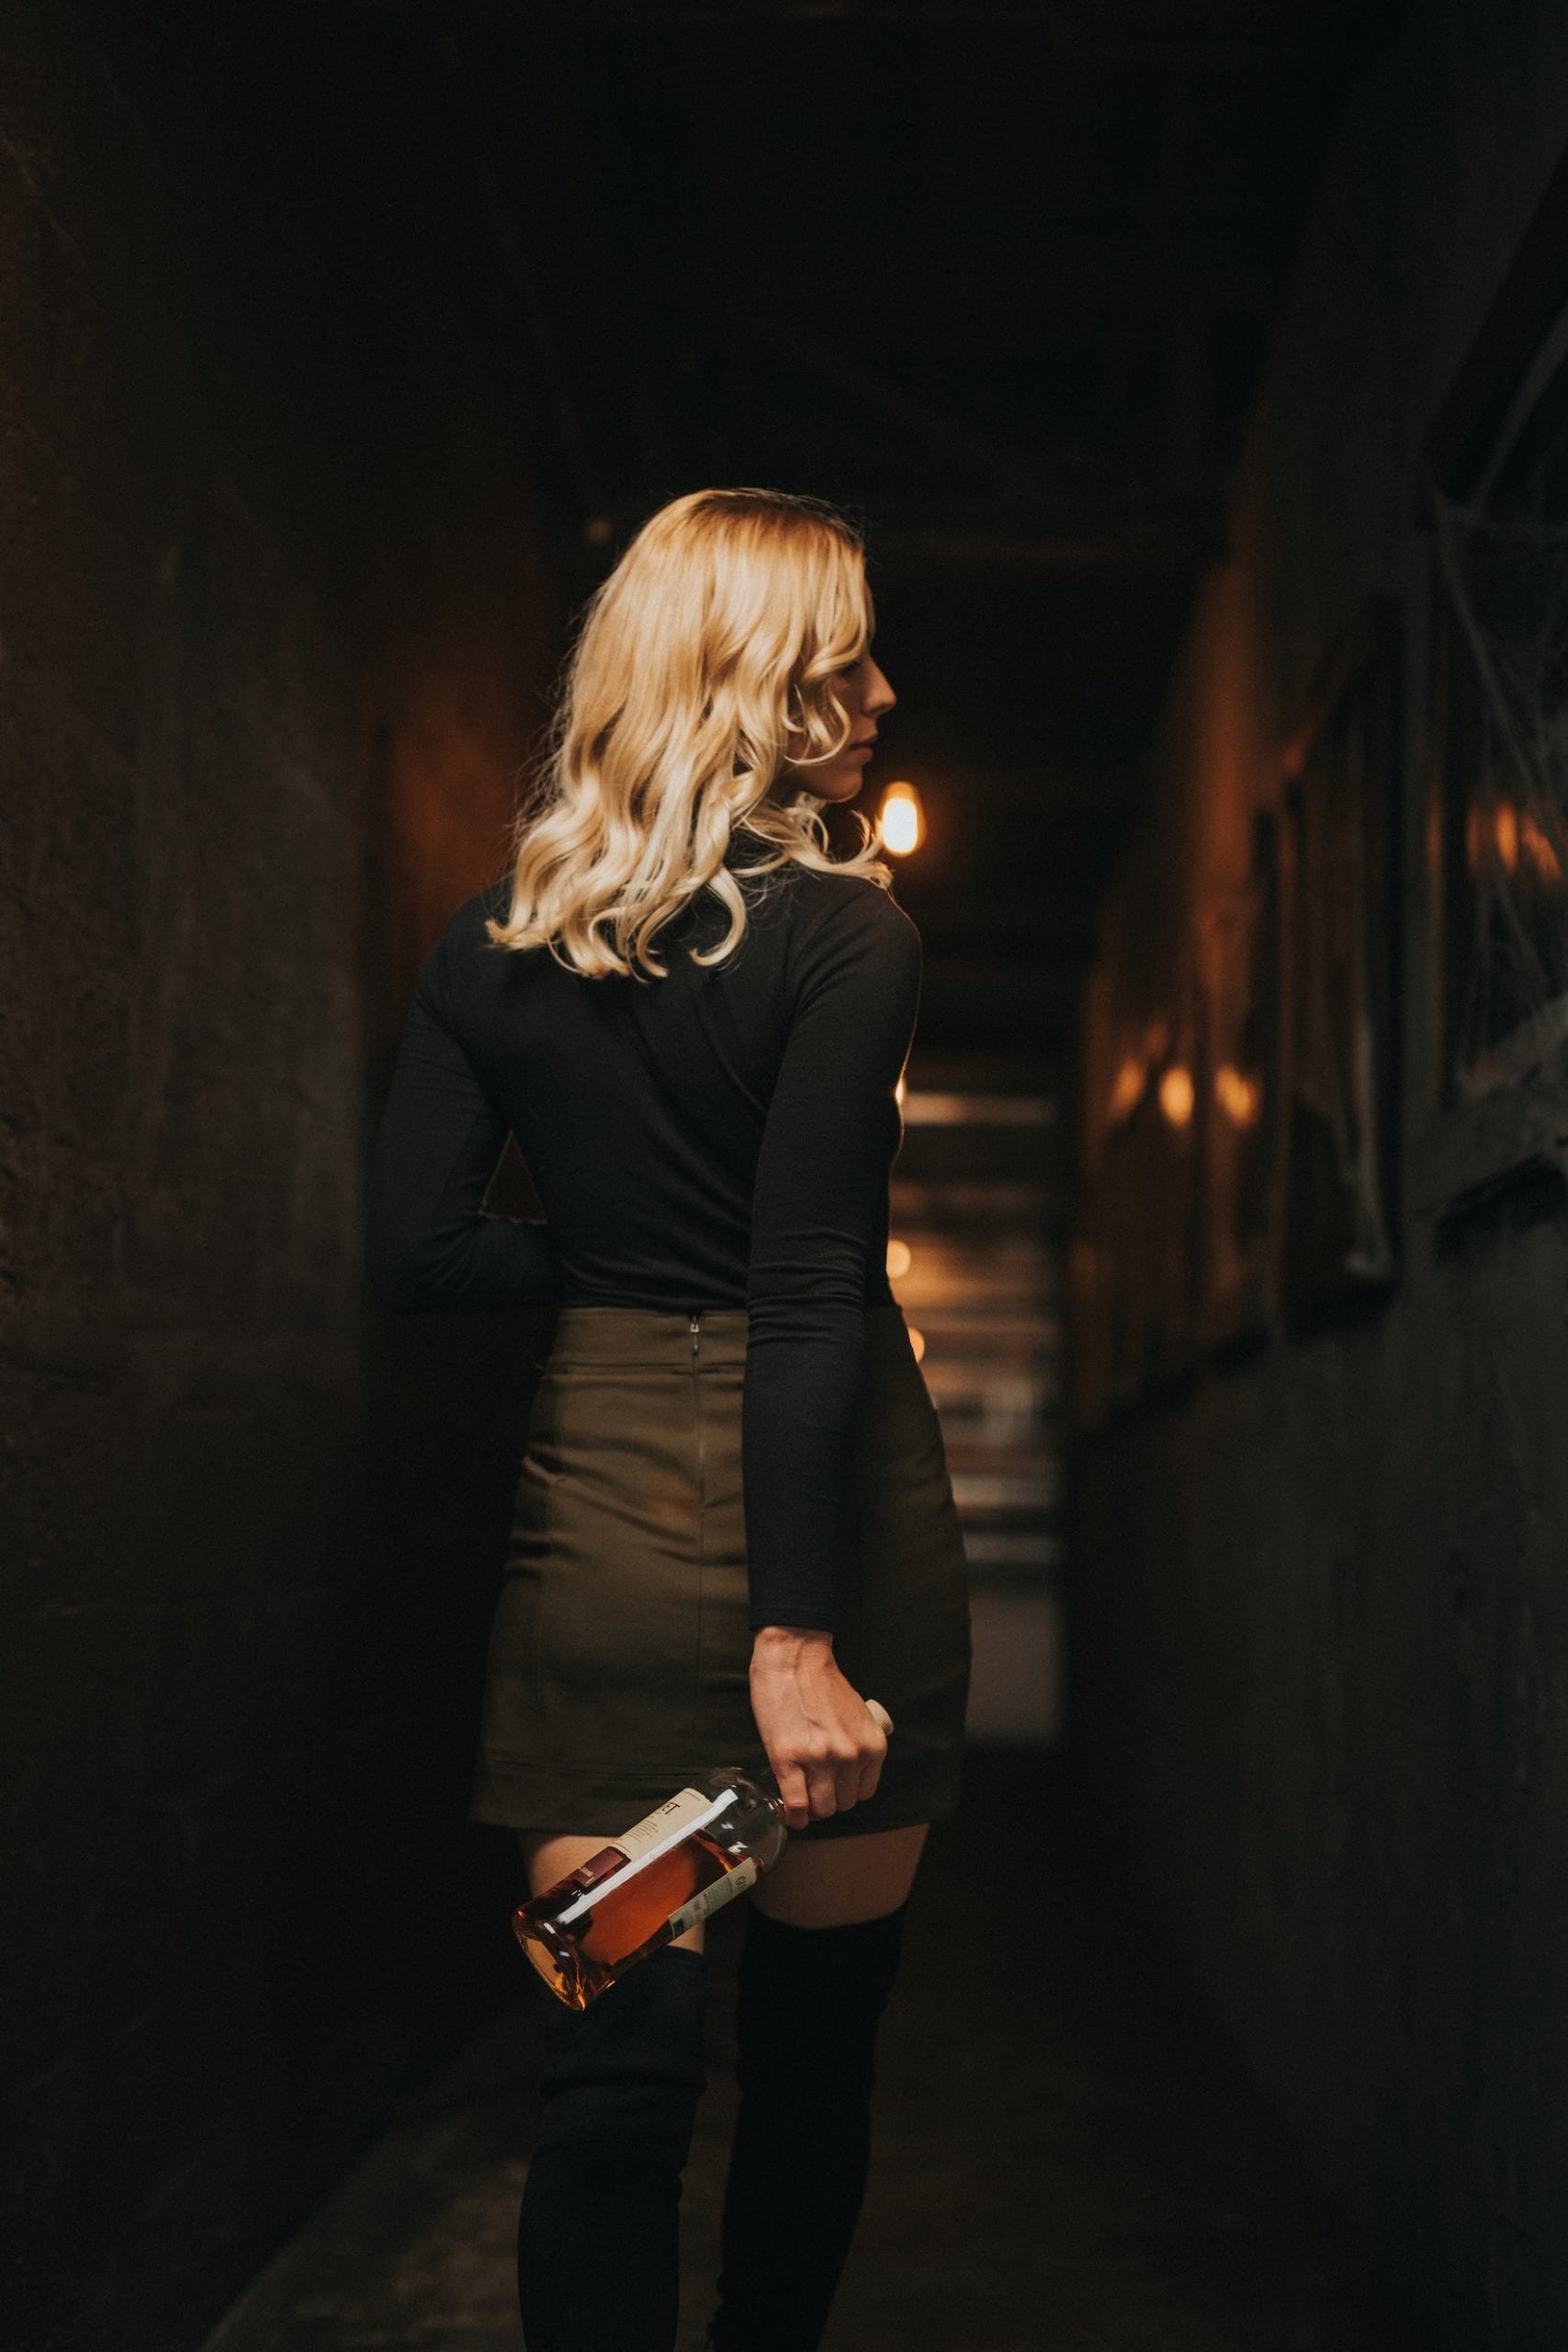 View from behind of woman with long blond hair walking carrying a liquor bottle looking off to the side